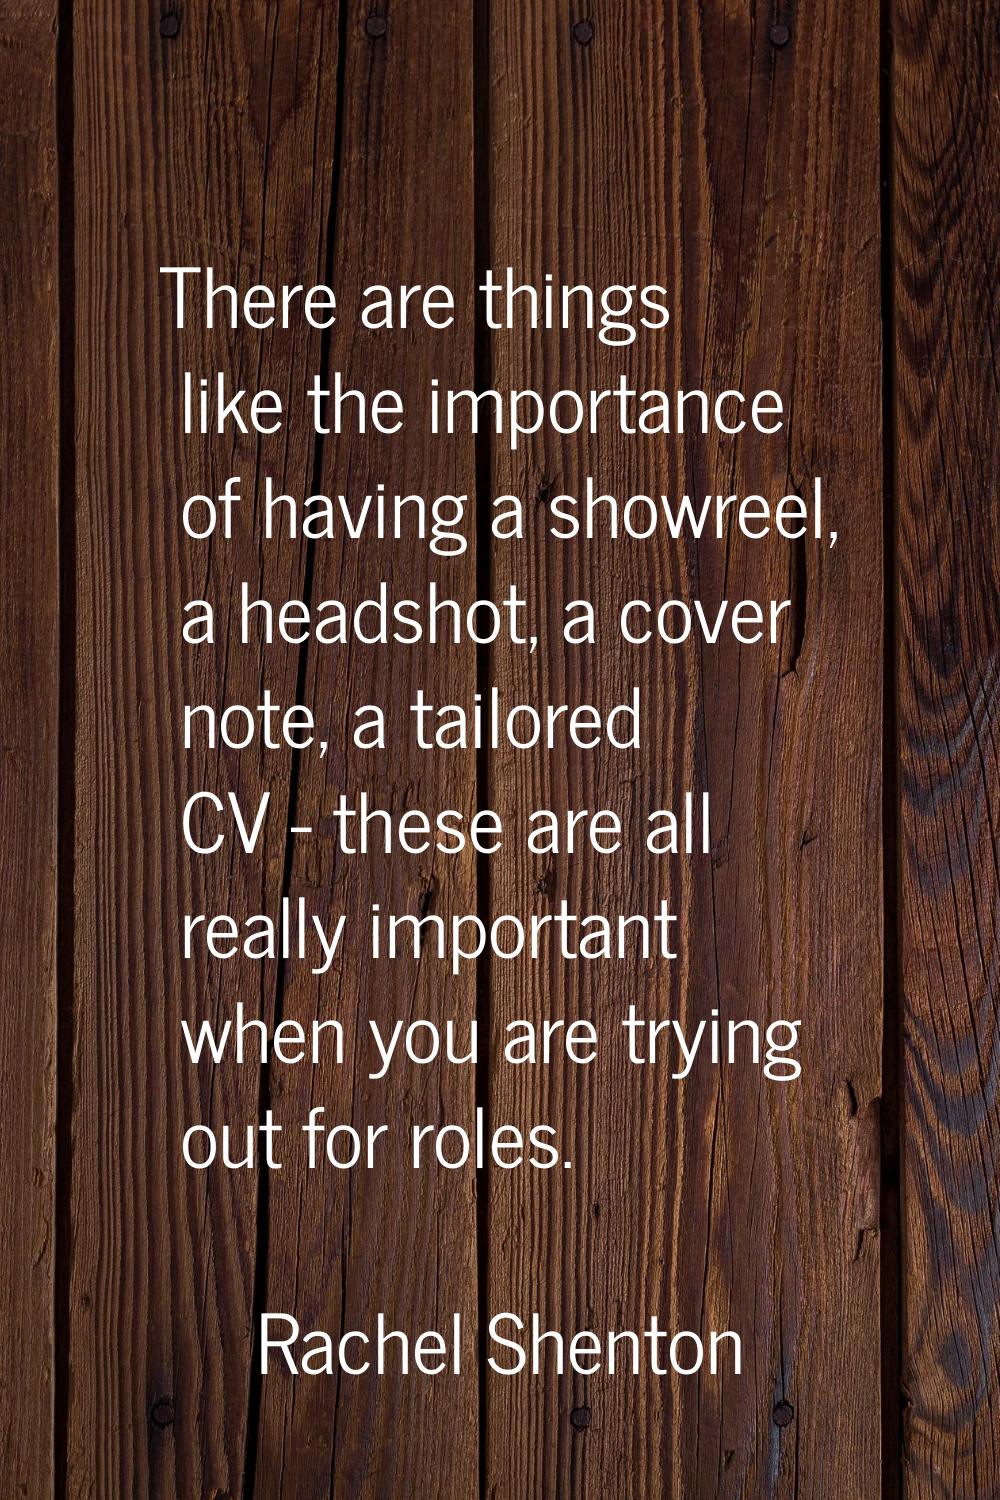 There are things like the importance of having a showreel, a headshot, a cover note, a tailored CV 